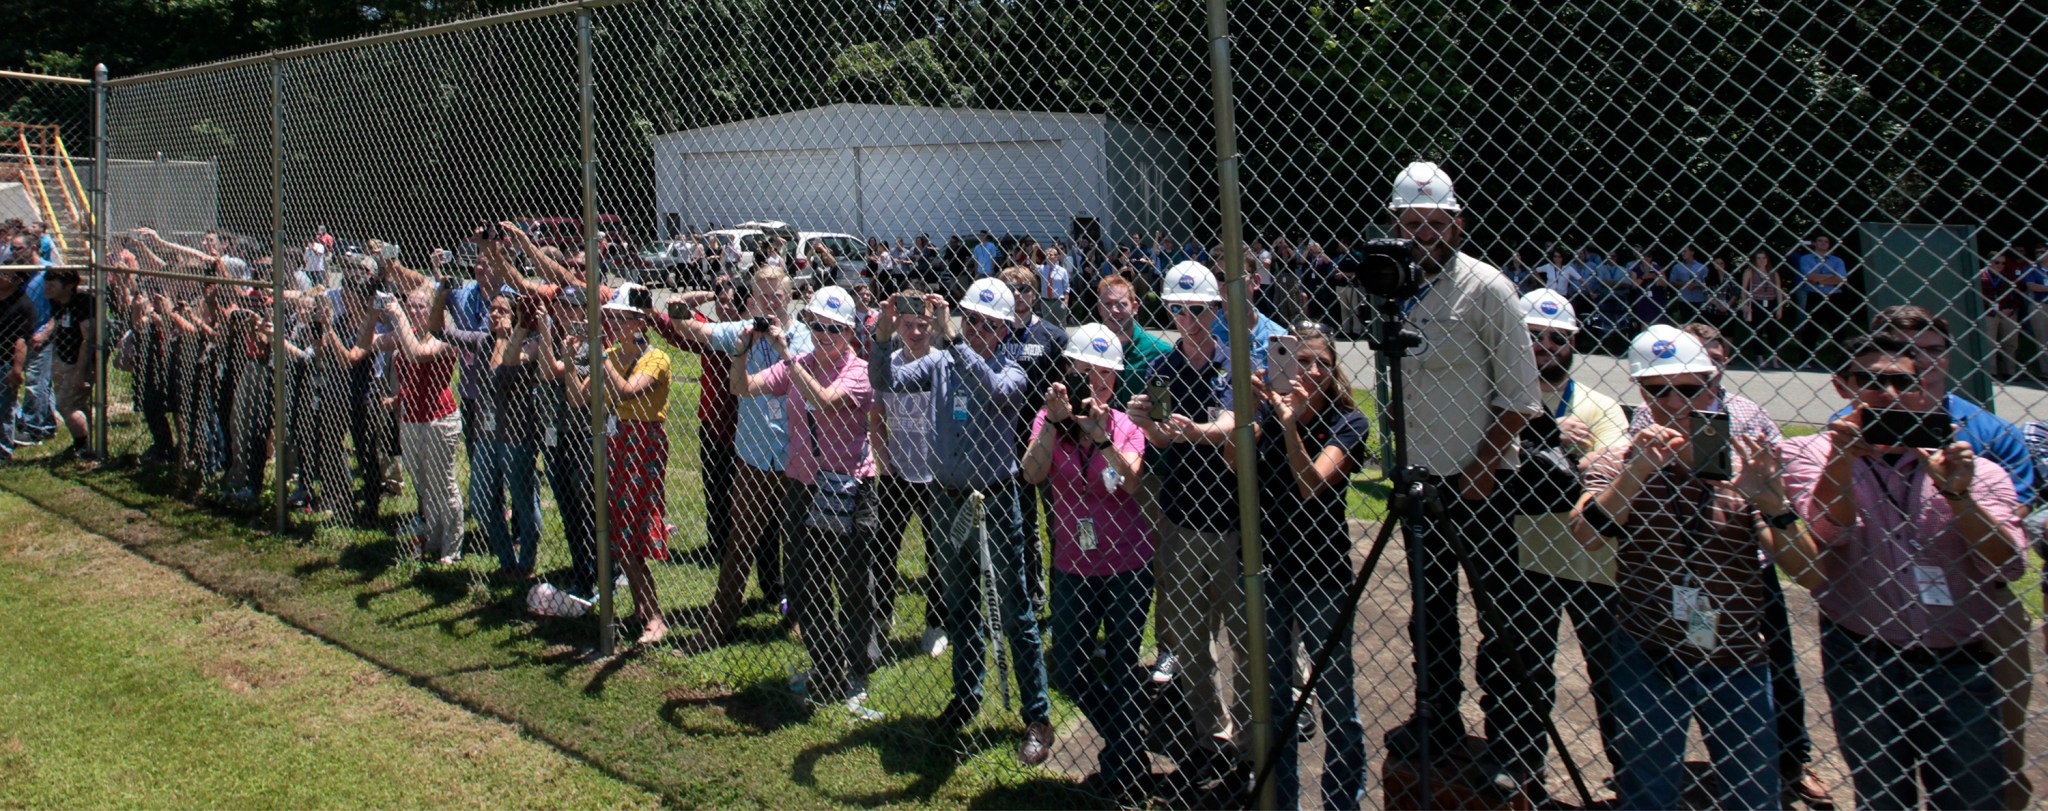 Many people in hard hats stand against a chain-link fence with cameras.